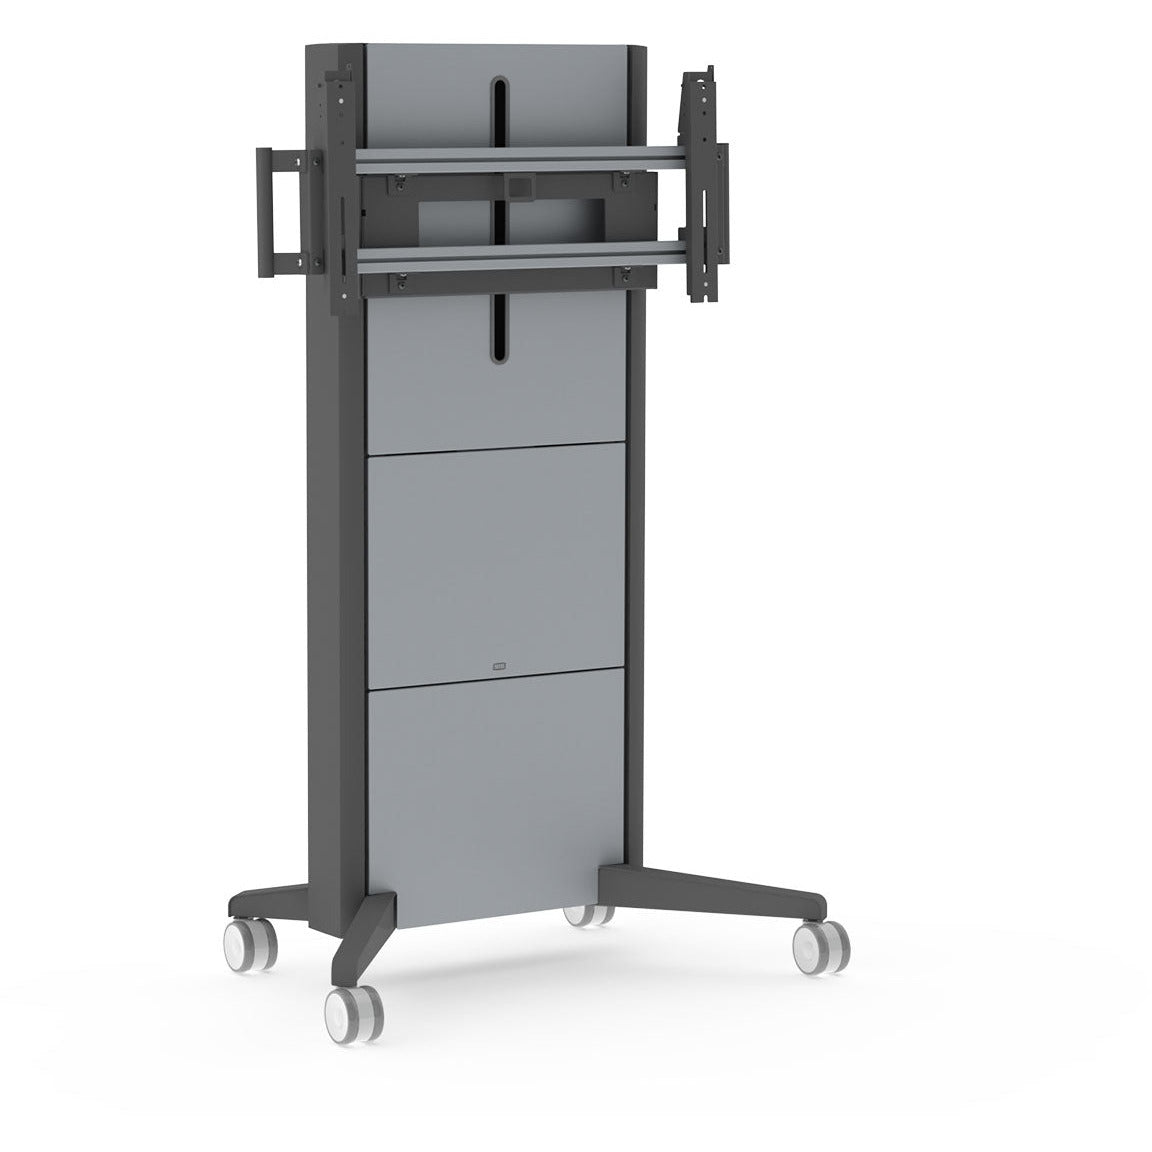 Slate Gray Sharp / NEC PD03MHA High End Mobile Height Adjustable Trolley for interactive LFDs from 46" to 98"